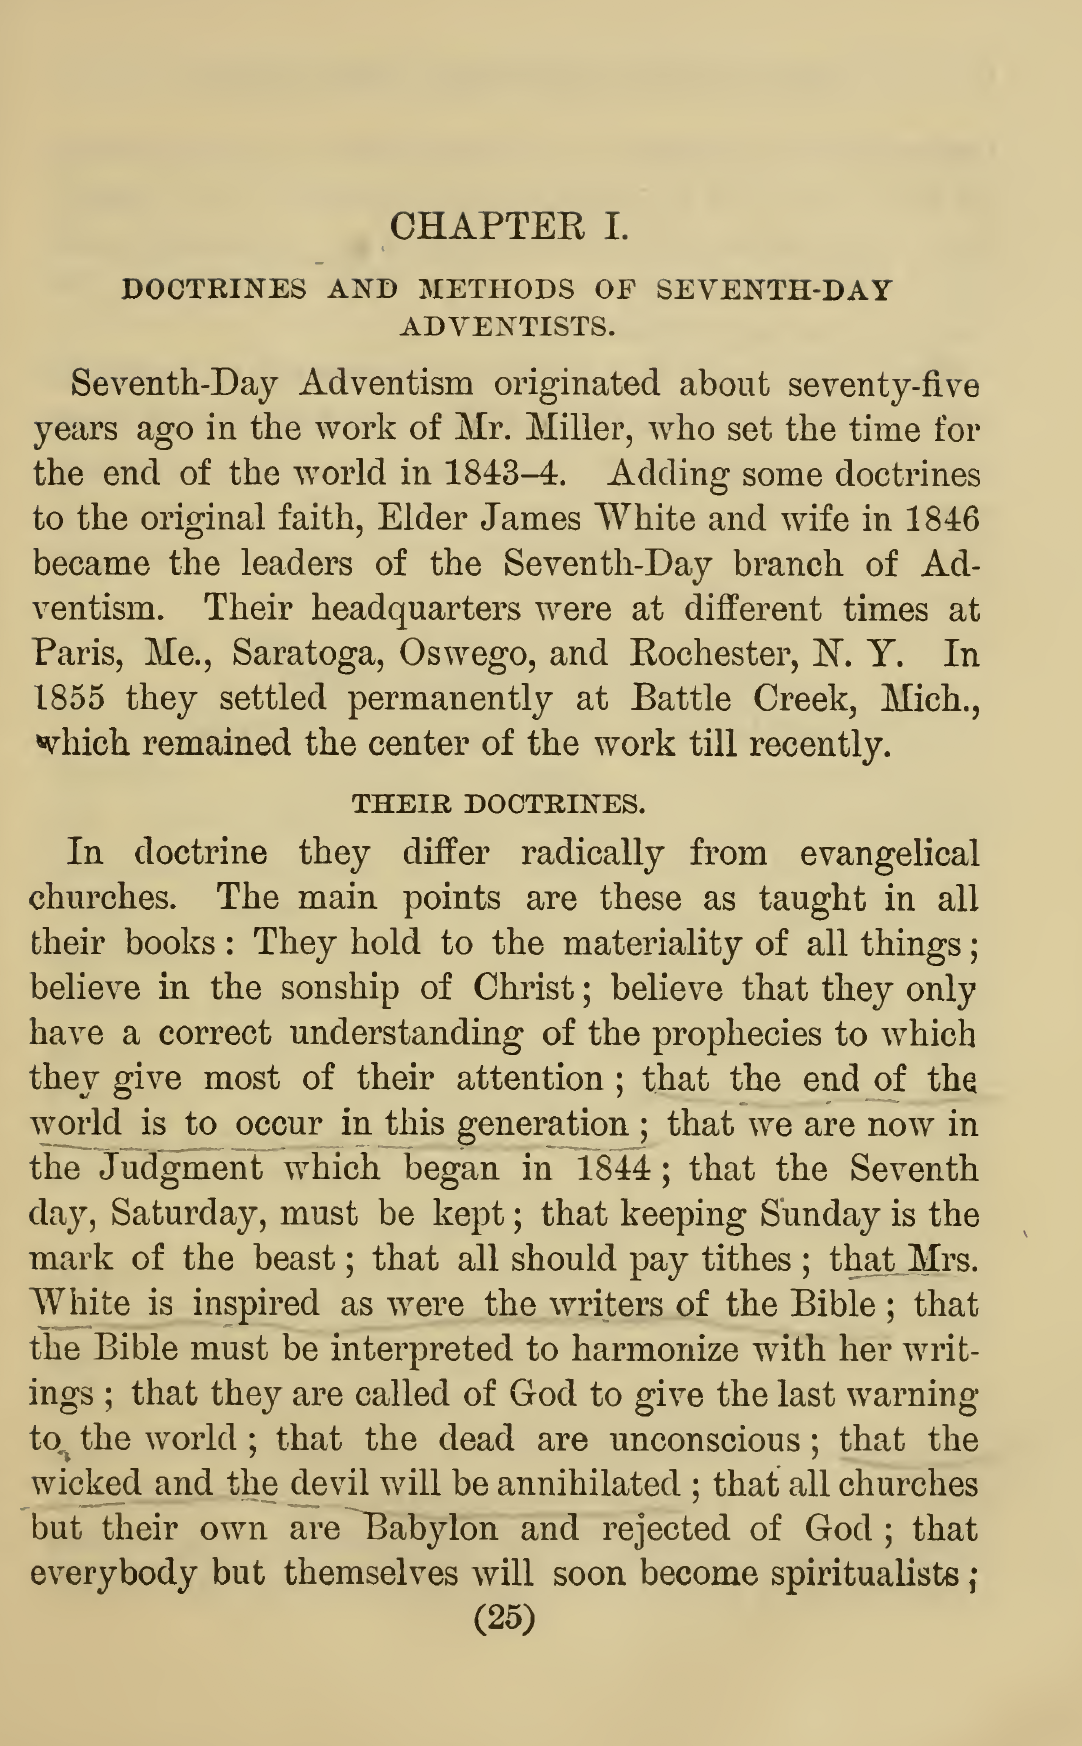 Seventh-day Adventism Renounced 1889, 14th Edition, pg 25 “they reject the doctrine of the Trinity” is removed. Source: https://archive.org/details/seventhdayadvent00canruoft/page/n33